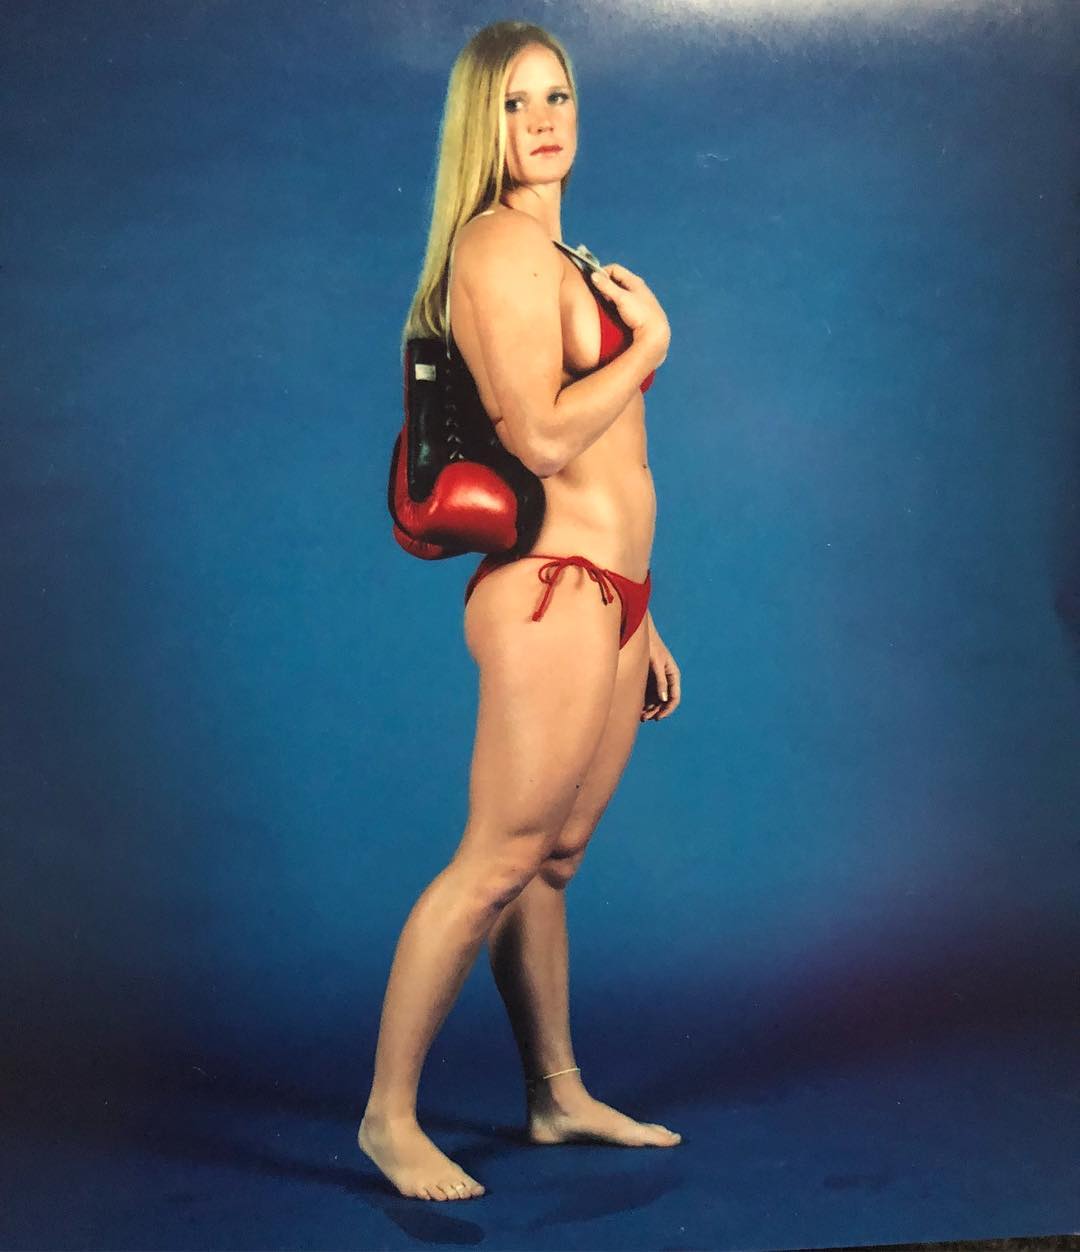 75+ Hot Pictures Of Holly Holm Will Prove That She Is One Of The Hottest And Sexiest Women There Is | Best Of Comic Books